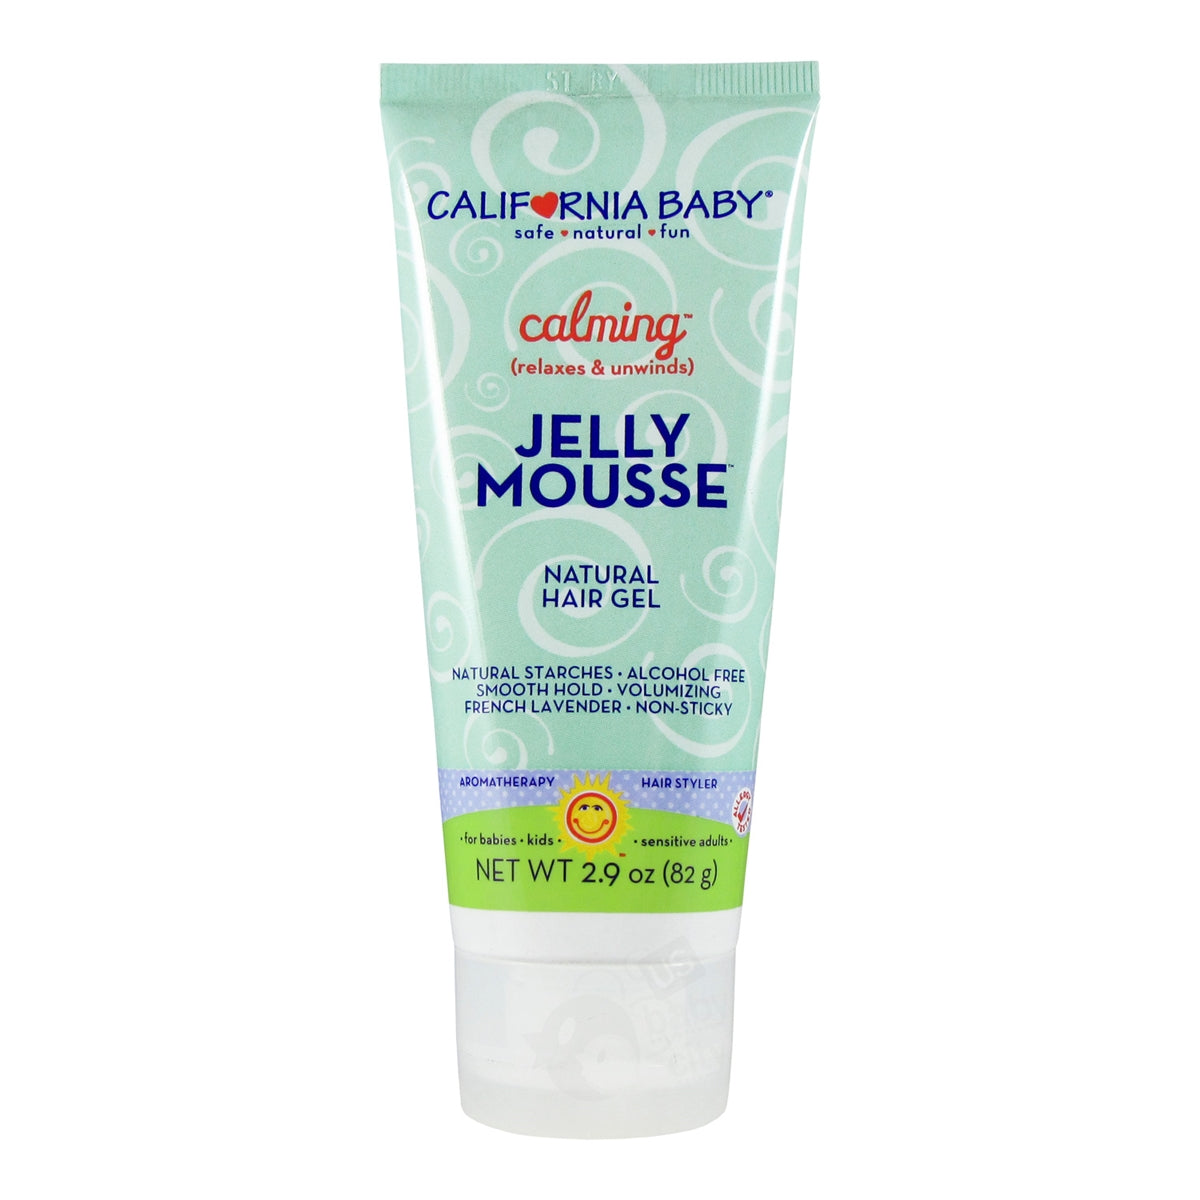 Calming Jelly Mousse - 2.9 oz. (California Baby)